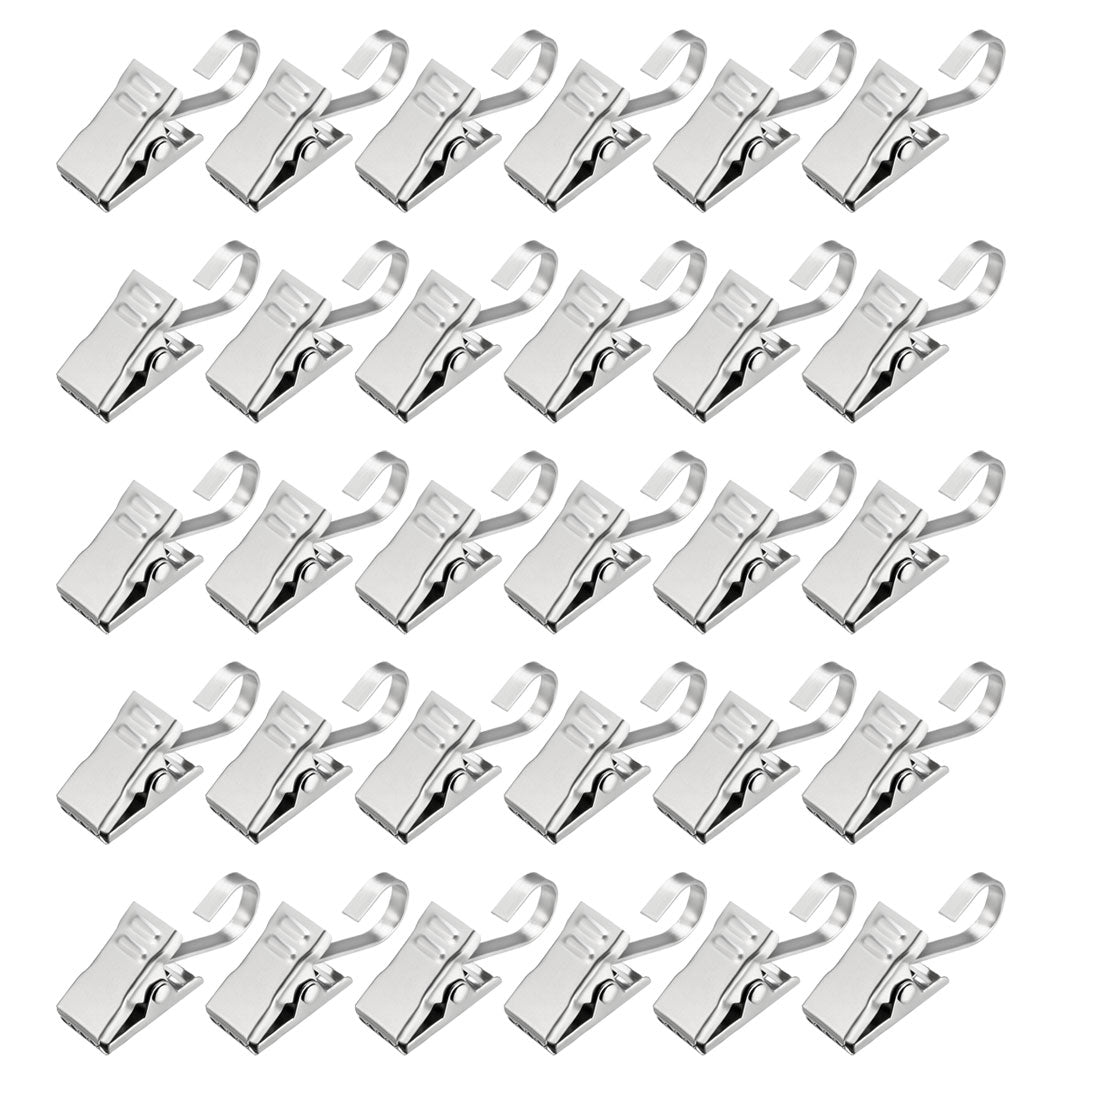 uxcell Uxcell Curtain Clip Hook Set Clips for Curtain Photos Home Decoration Art Craft Display 0.71"*0.39" Silver Tone 30pcs